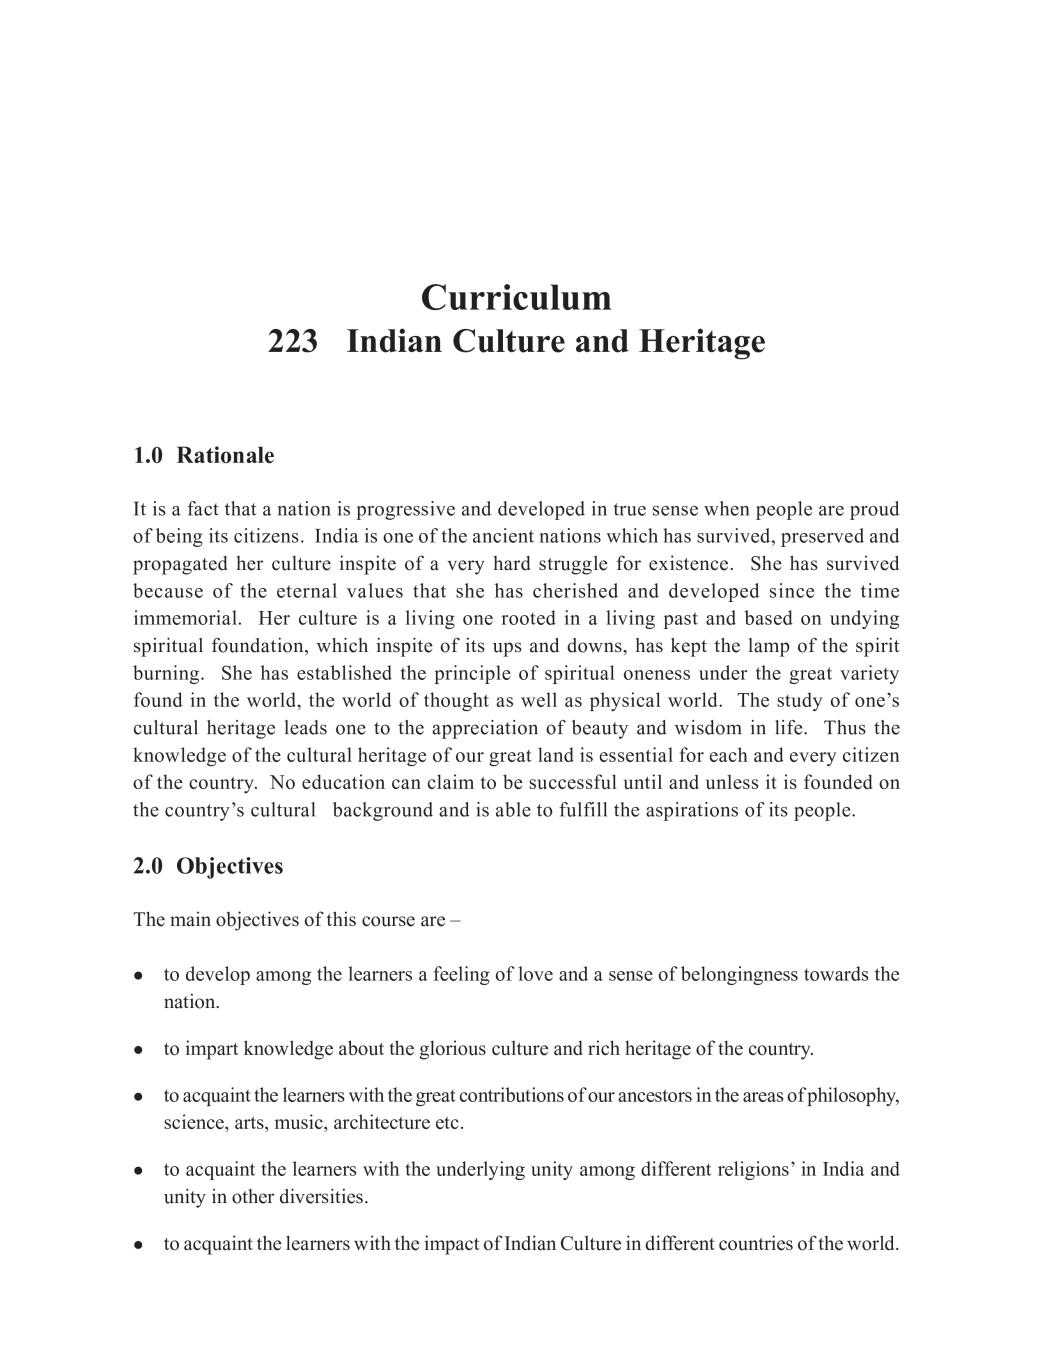 NIOS Class 10 Syllabus - Indian Culture and Heritage - Page 1